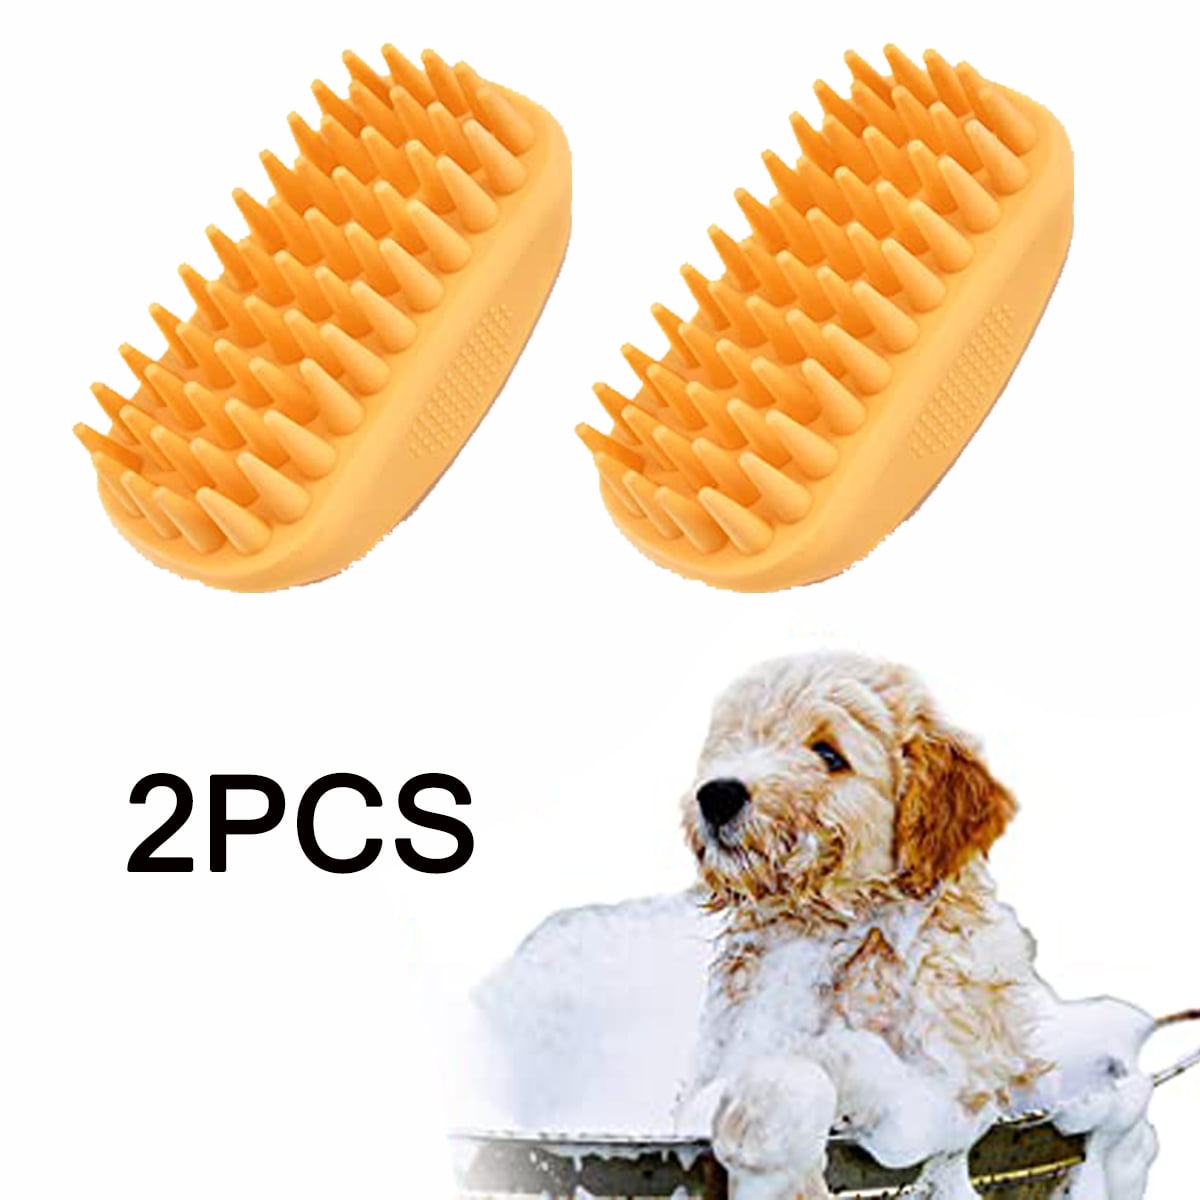 ROPO Dog Grooming Brush, Pet Shampoo Bath Brush Soothing Massage Rubber  Comb with Adjustable Ring Handle for Long Short Haired Dogs and Cats 2pcs